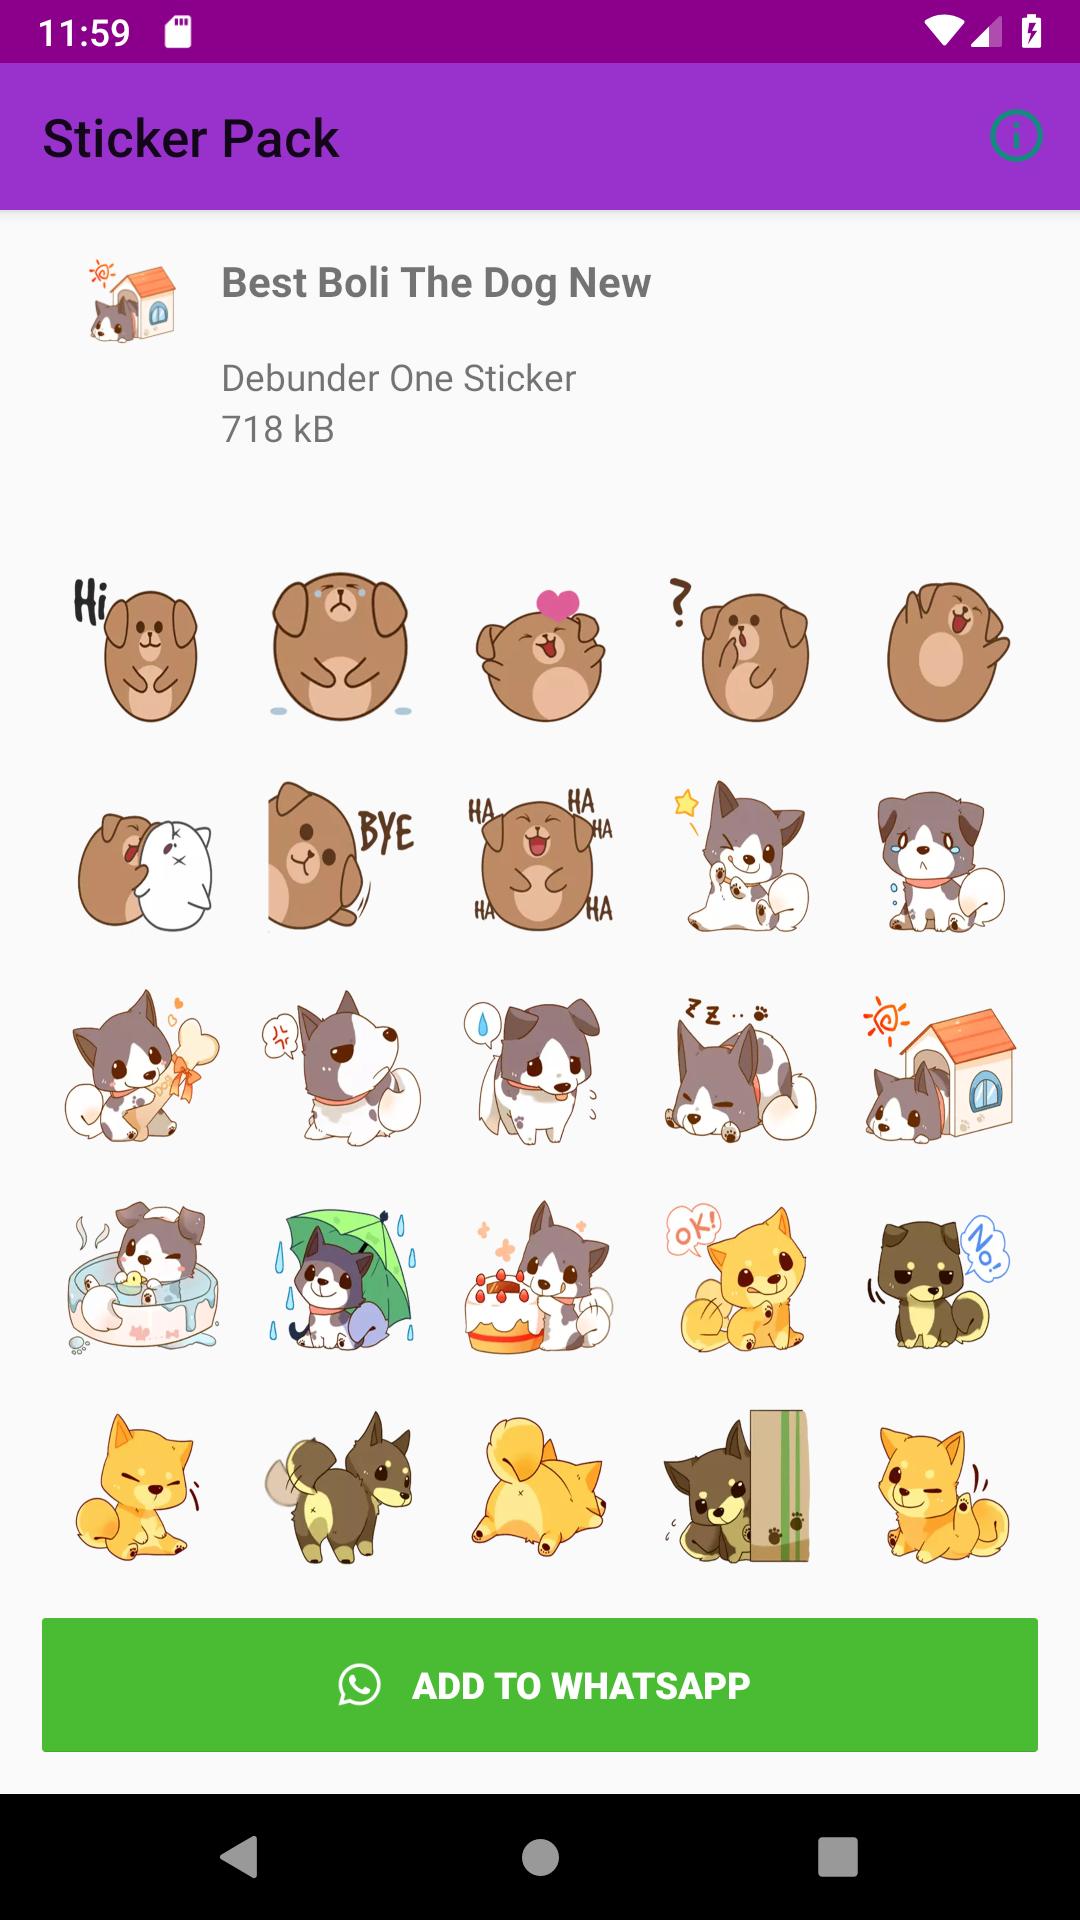 New Cute Dog Sticker Pack For Whatsapp 2019 For Android Apk Download